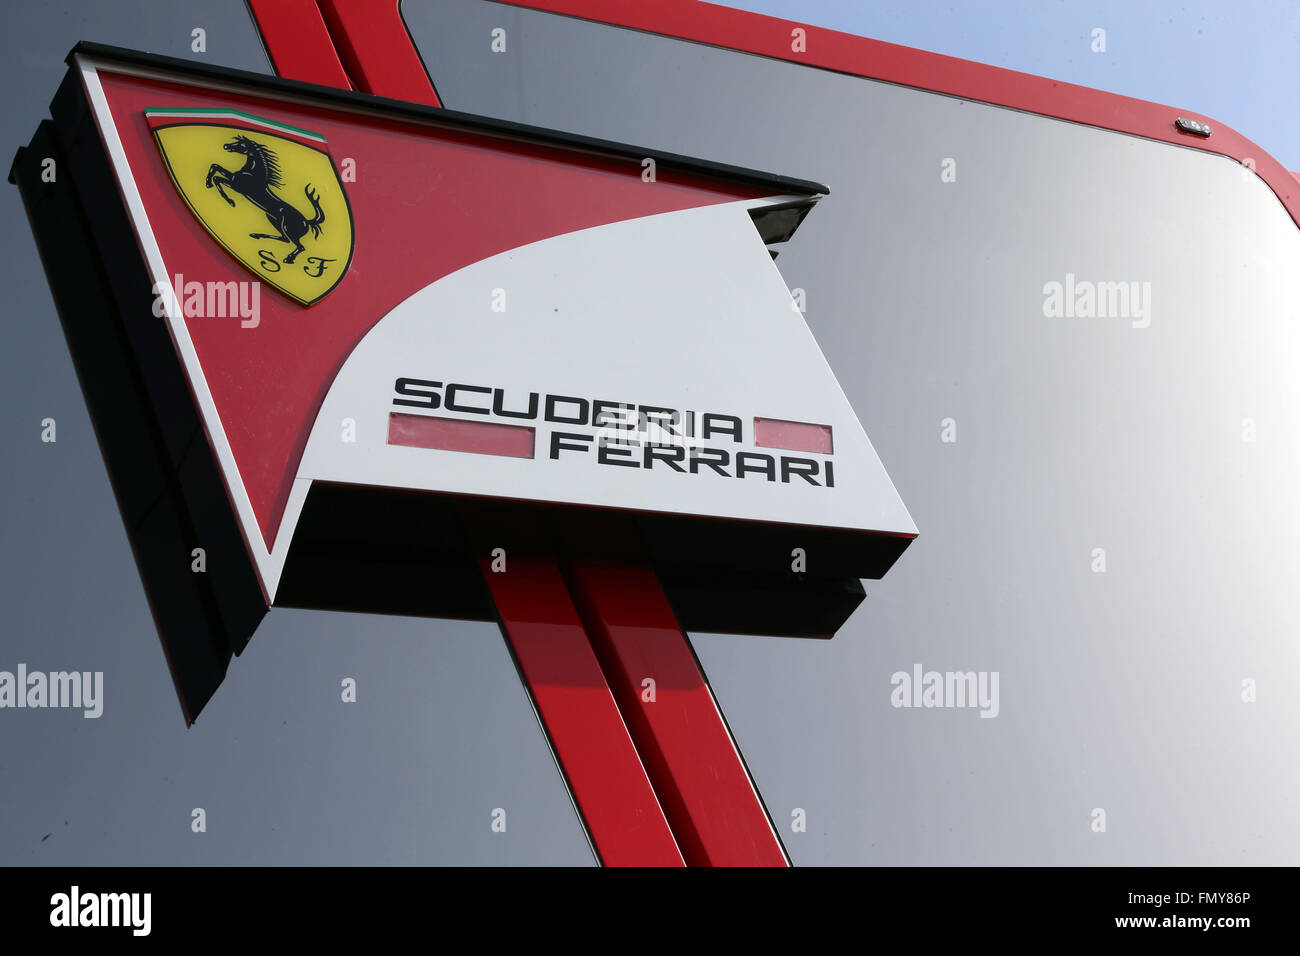 The motorhome of Ferrari seen during the training session for the upcoming Formula One season at the Circuit de Barcelona - Catalunya in Barcelona, Spain, 23 February 2016. Photo: Jens Buettner/dpa Stock Photo